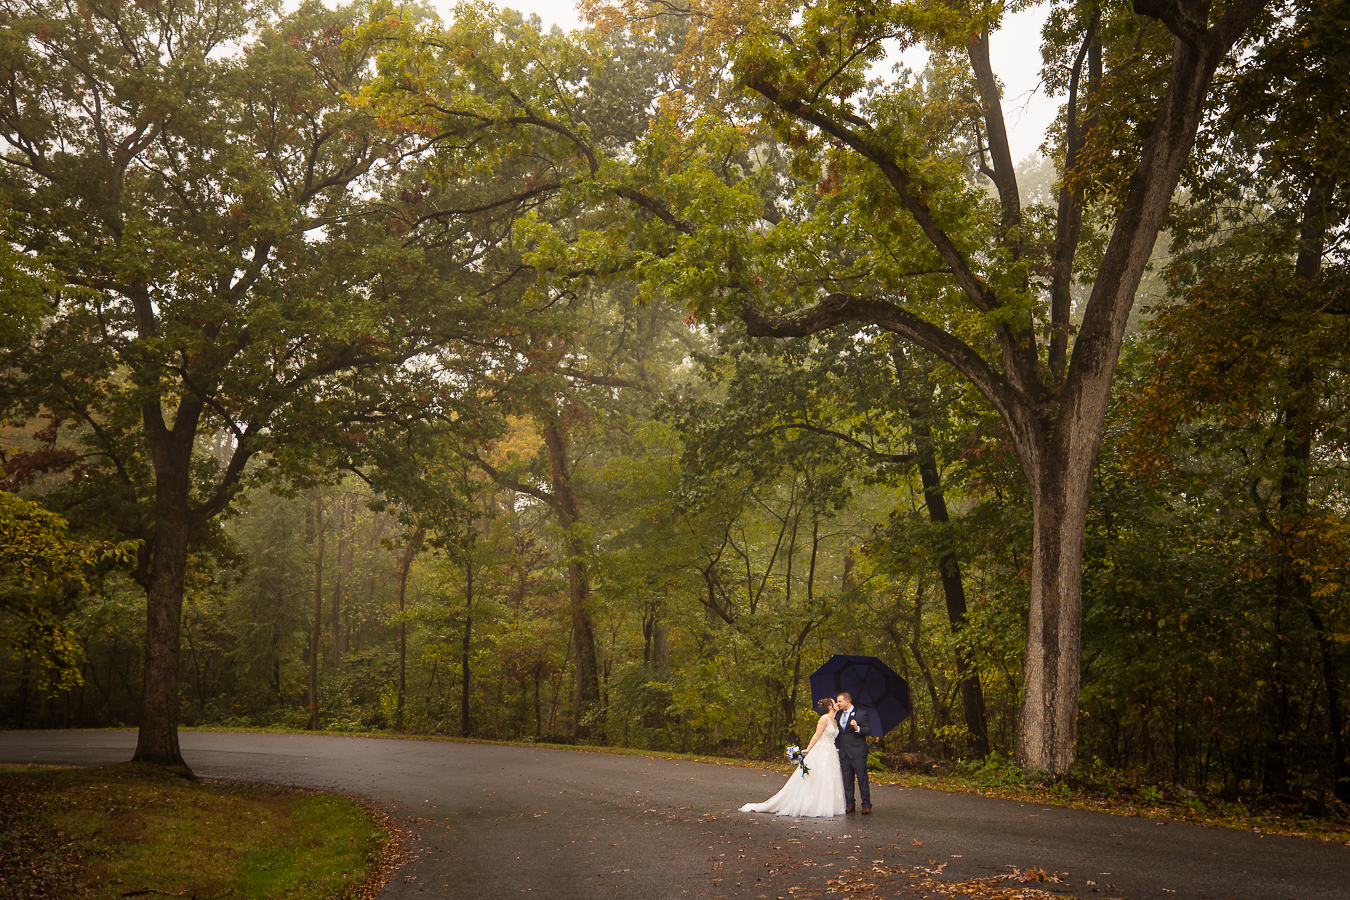 gettysburg wedding photographer, lisa rhinehart, captures this wide angle image of the bride and groom as they kiss under the umbrella on a walkway through the Gettysburg battlefields on this rainy day wedding 